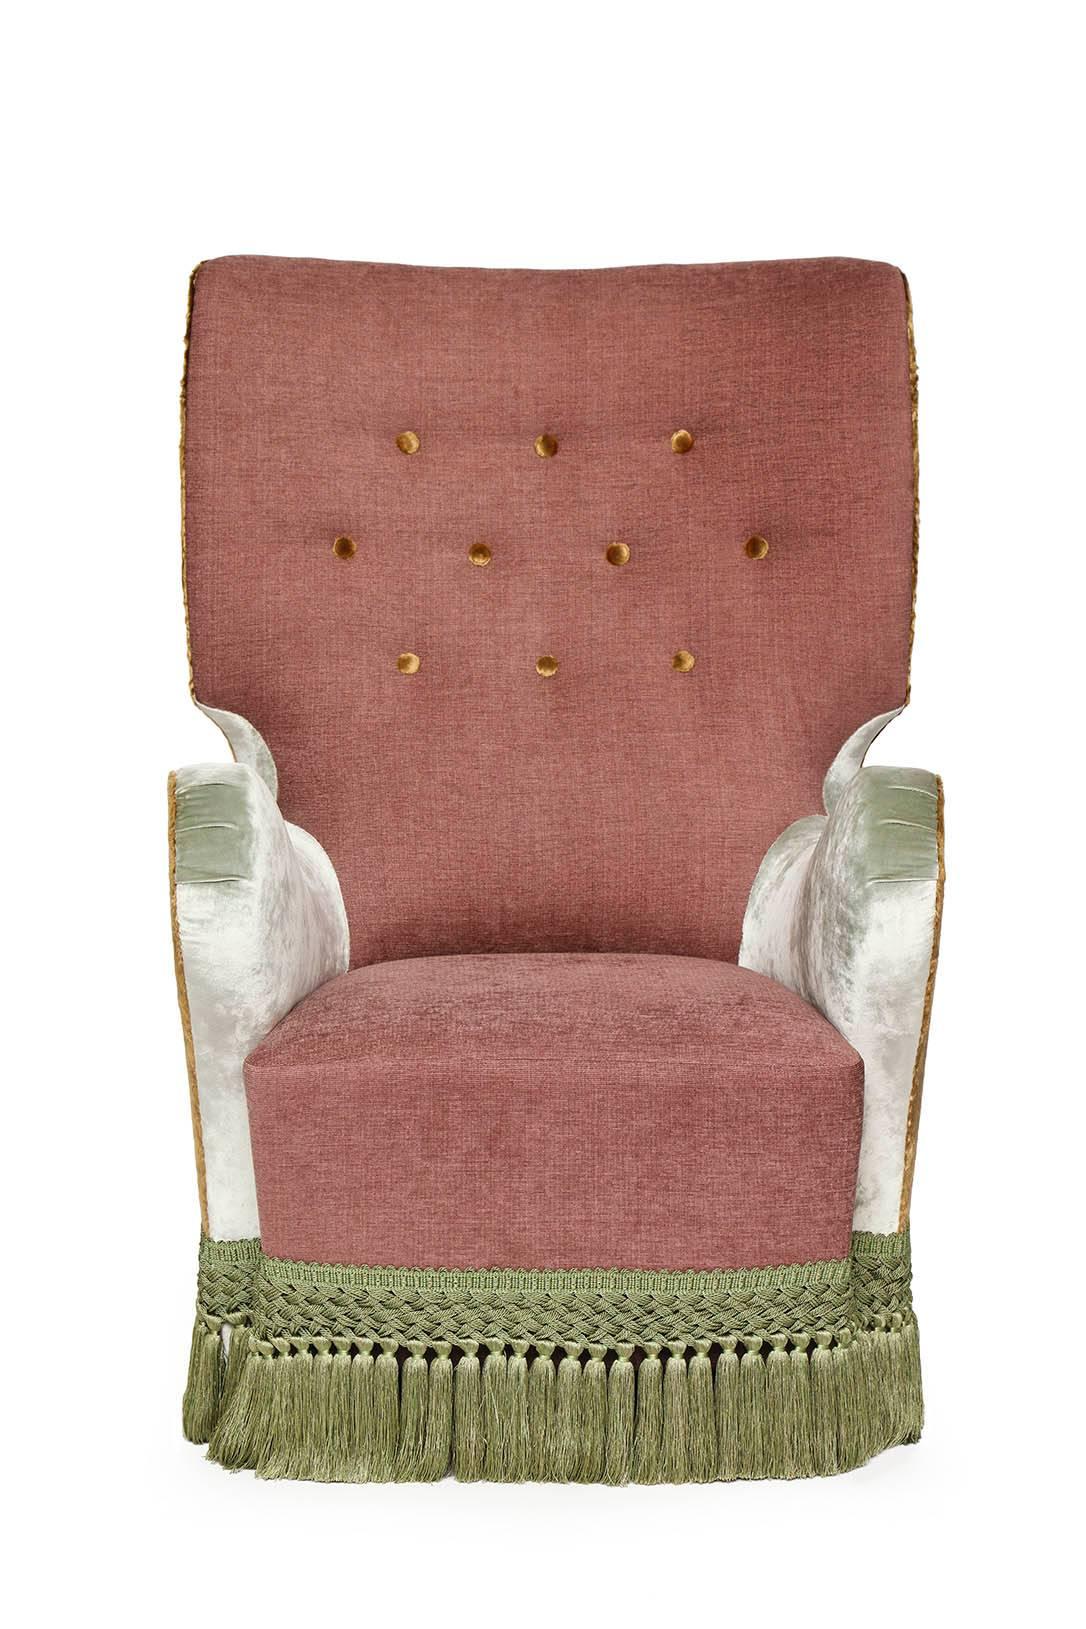 The custom Dolly swivel wingback chair is a tailored contemporary vision of Napoleon III style seating.
Handcrafted on a custom-made wooden frame, swivel base, upholstery.
Custom size and custom cushion available.
Each piece is handcrafted in New